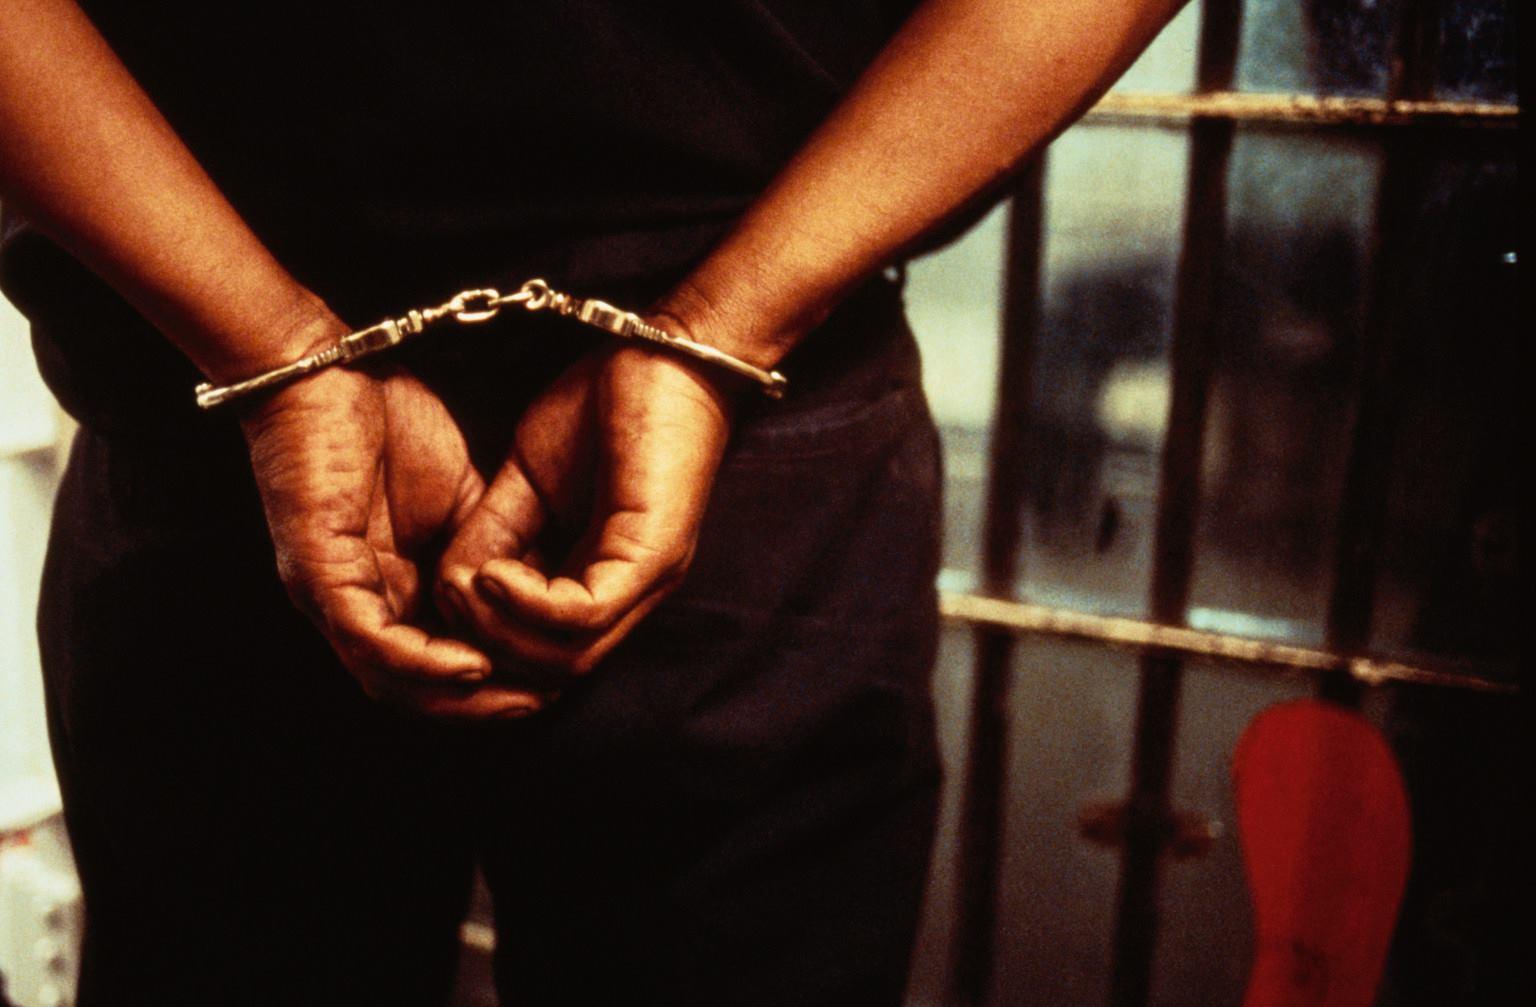 Man arrested for indecent assault of a two-year-old child Blantyre